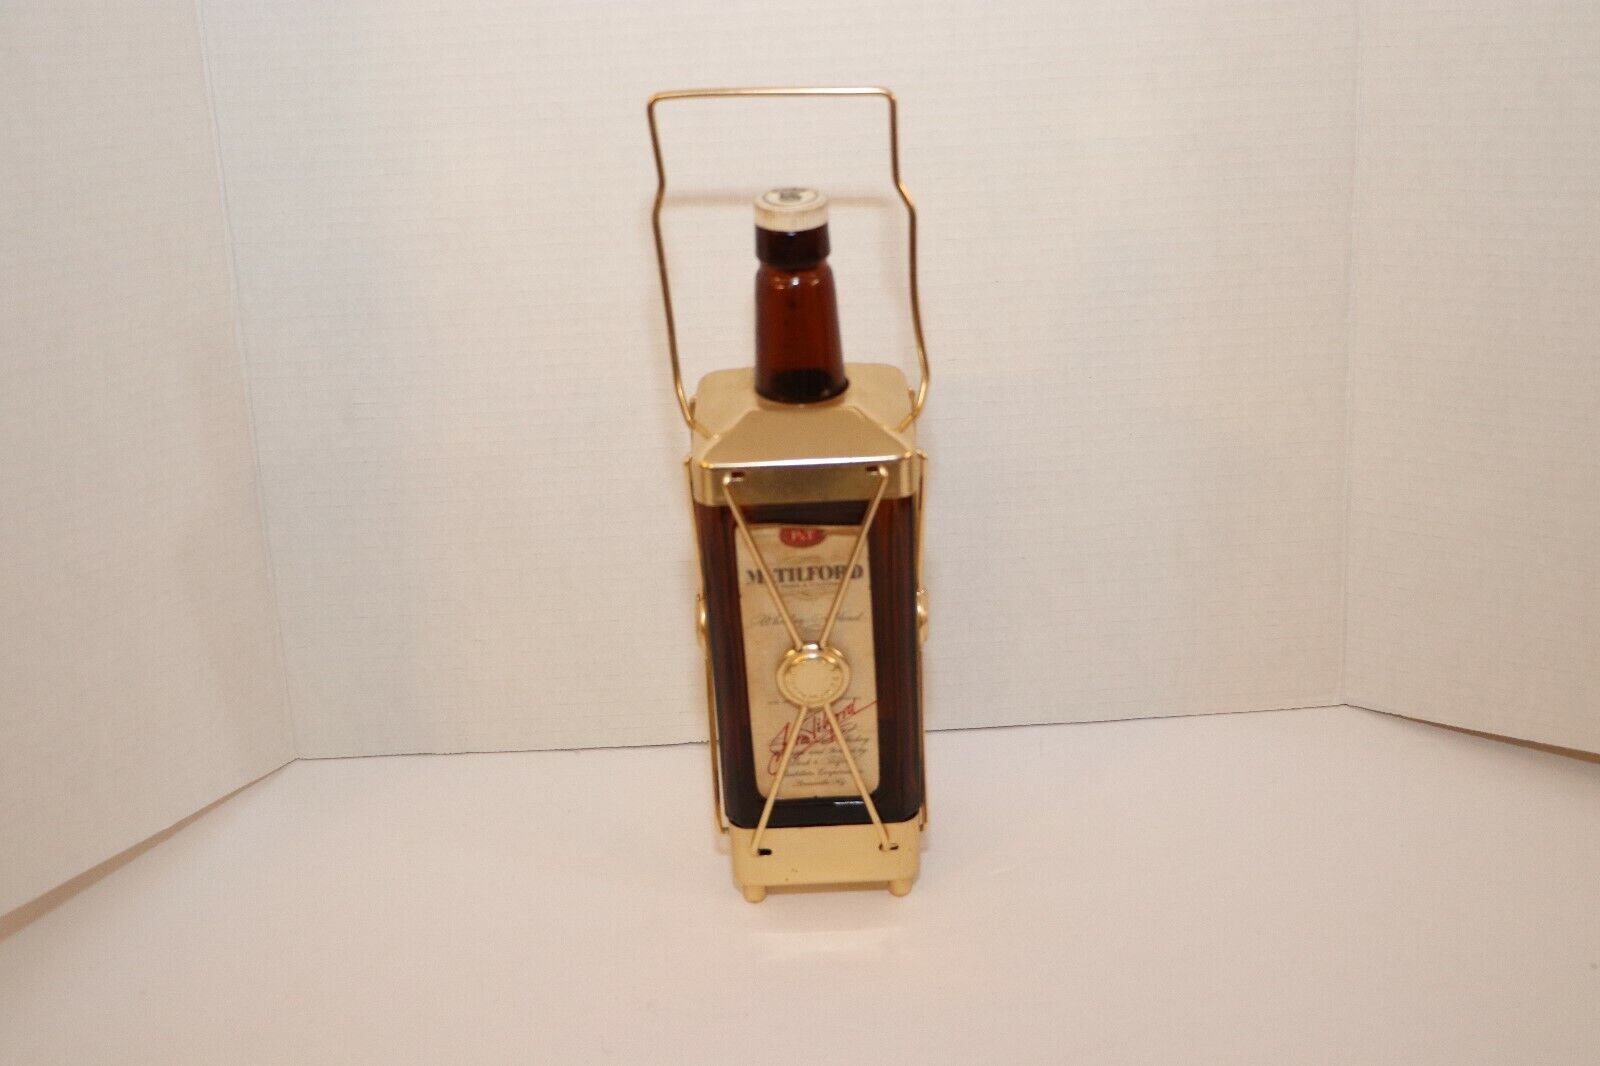 Vintage Mr Tilford Whiskey Bottle Music Box by Swiss Harmony Works